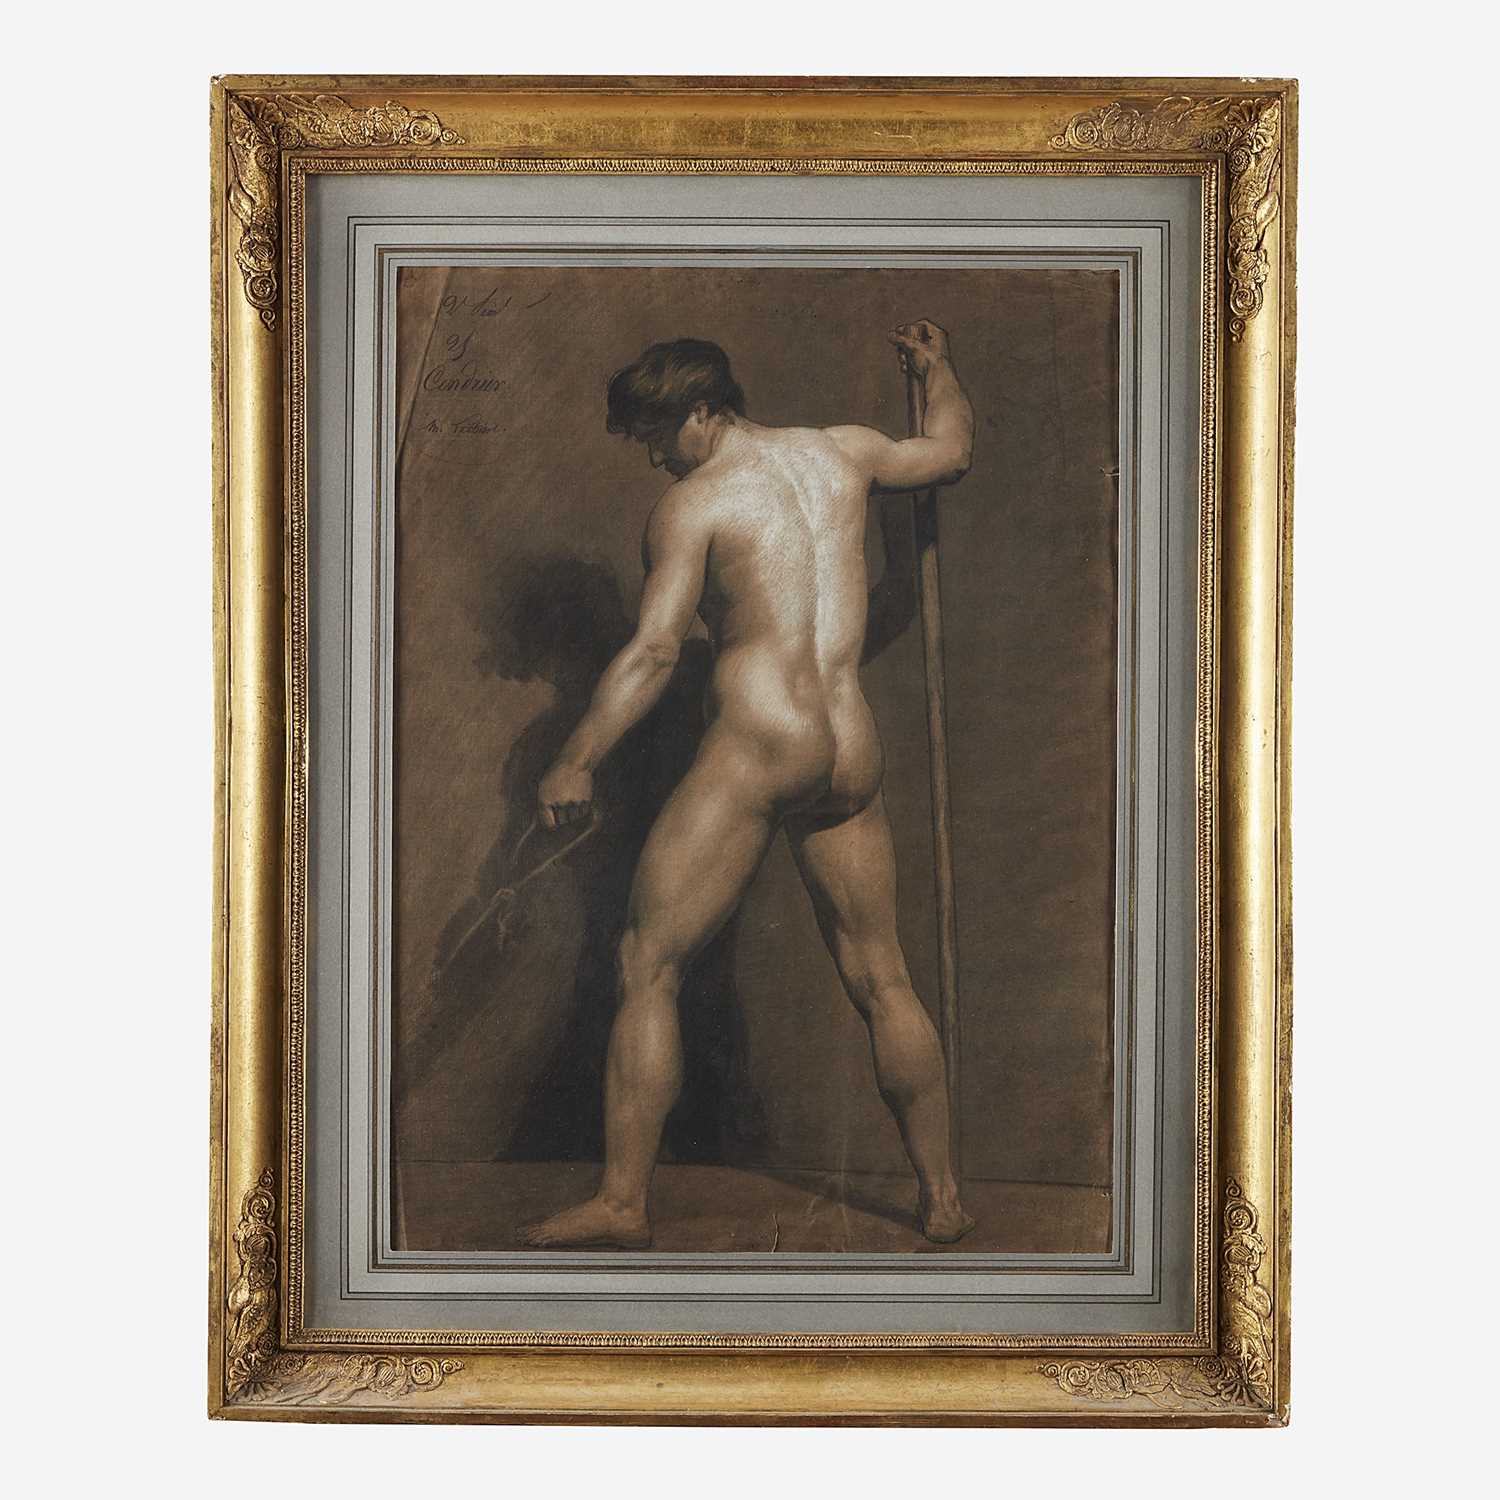 Lot 40 - Manner of Jacques-Louis David (French, 1748–1825)